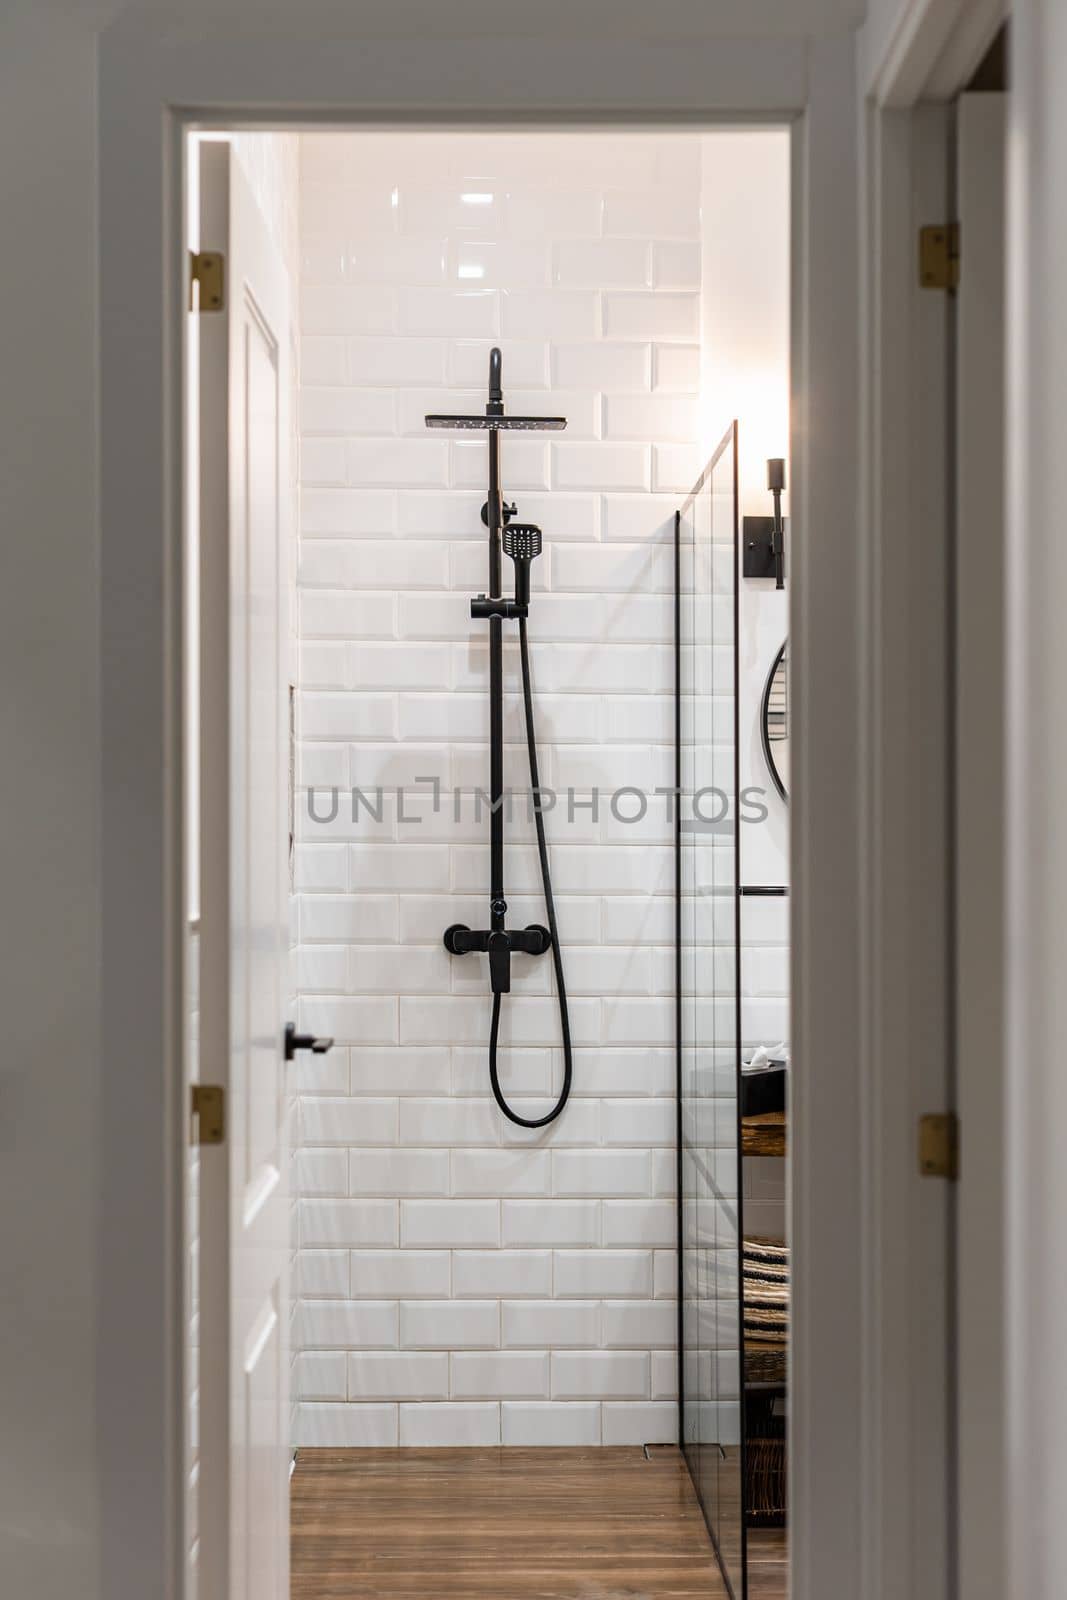 Looking at shower area in bathroom through doorway in hallway. White brick walls with paint reflecting bright light from lamps from ceiling. On wall is black metal faucet and glass railing on side. by apavlin